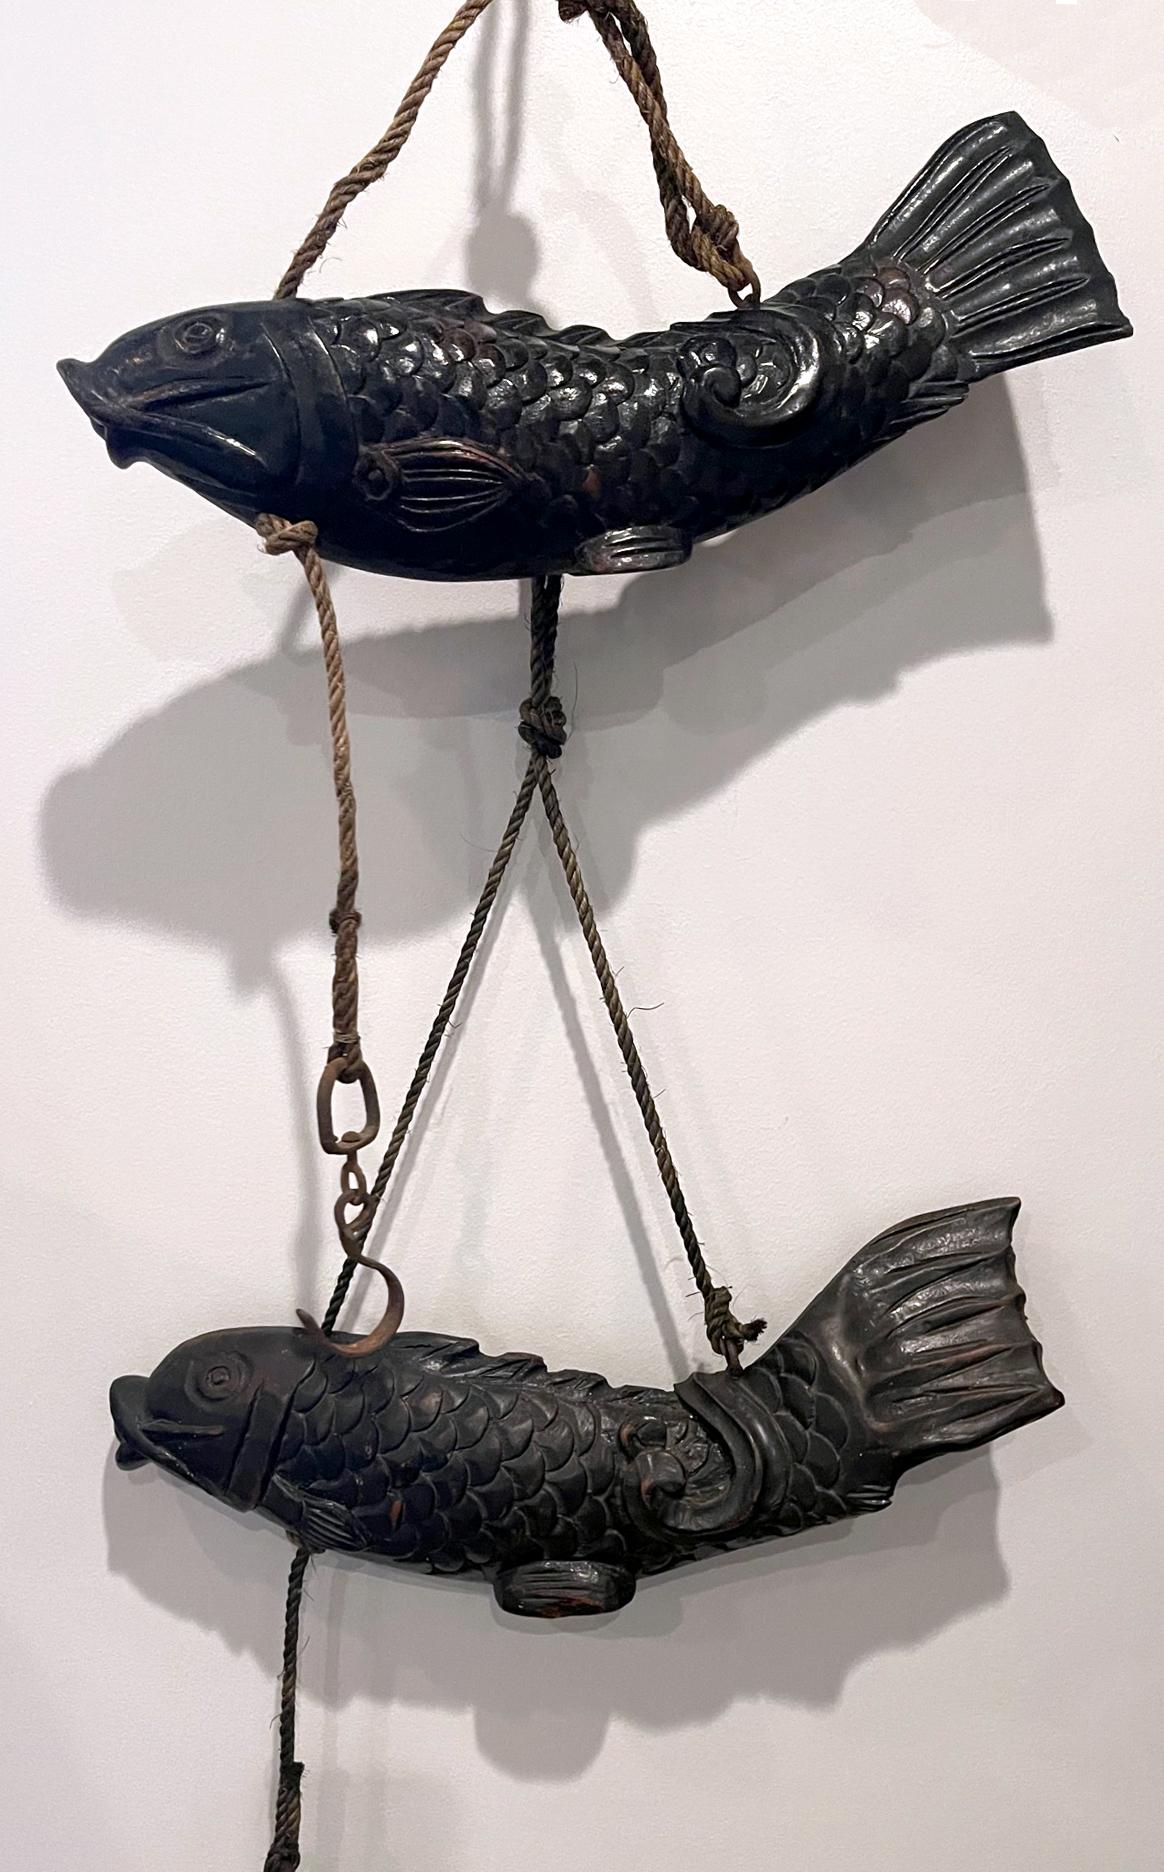 A near pair of wood koi fish from Japan circa 1860-90s of late Meiji Period. Hand-carved from solid wood, these sculptures are known as Jizai Kagi in Japanese and function as the leveling pulley for the attached hearth hook. Traditionally, they were